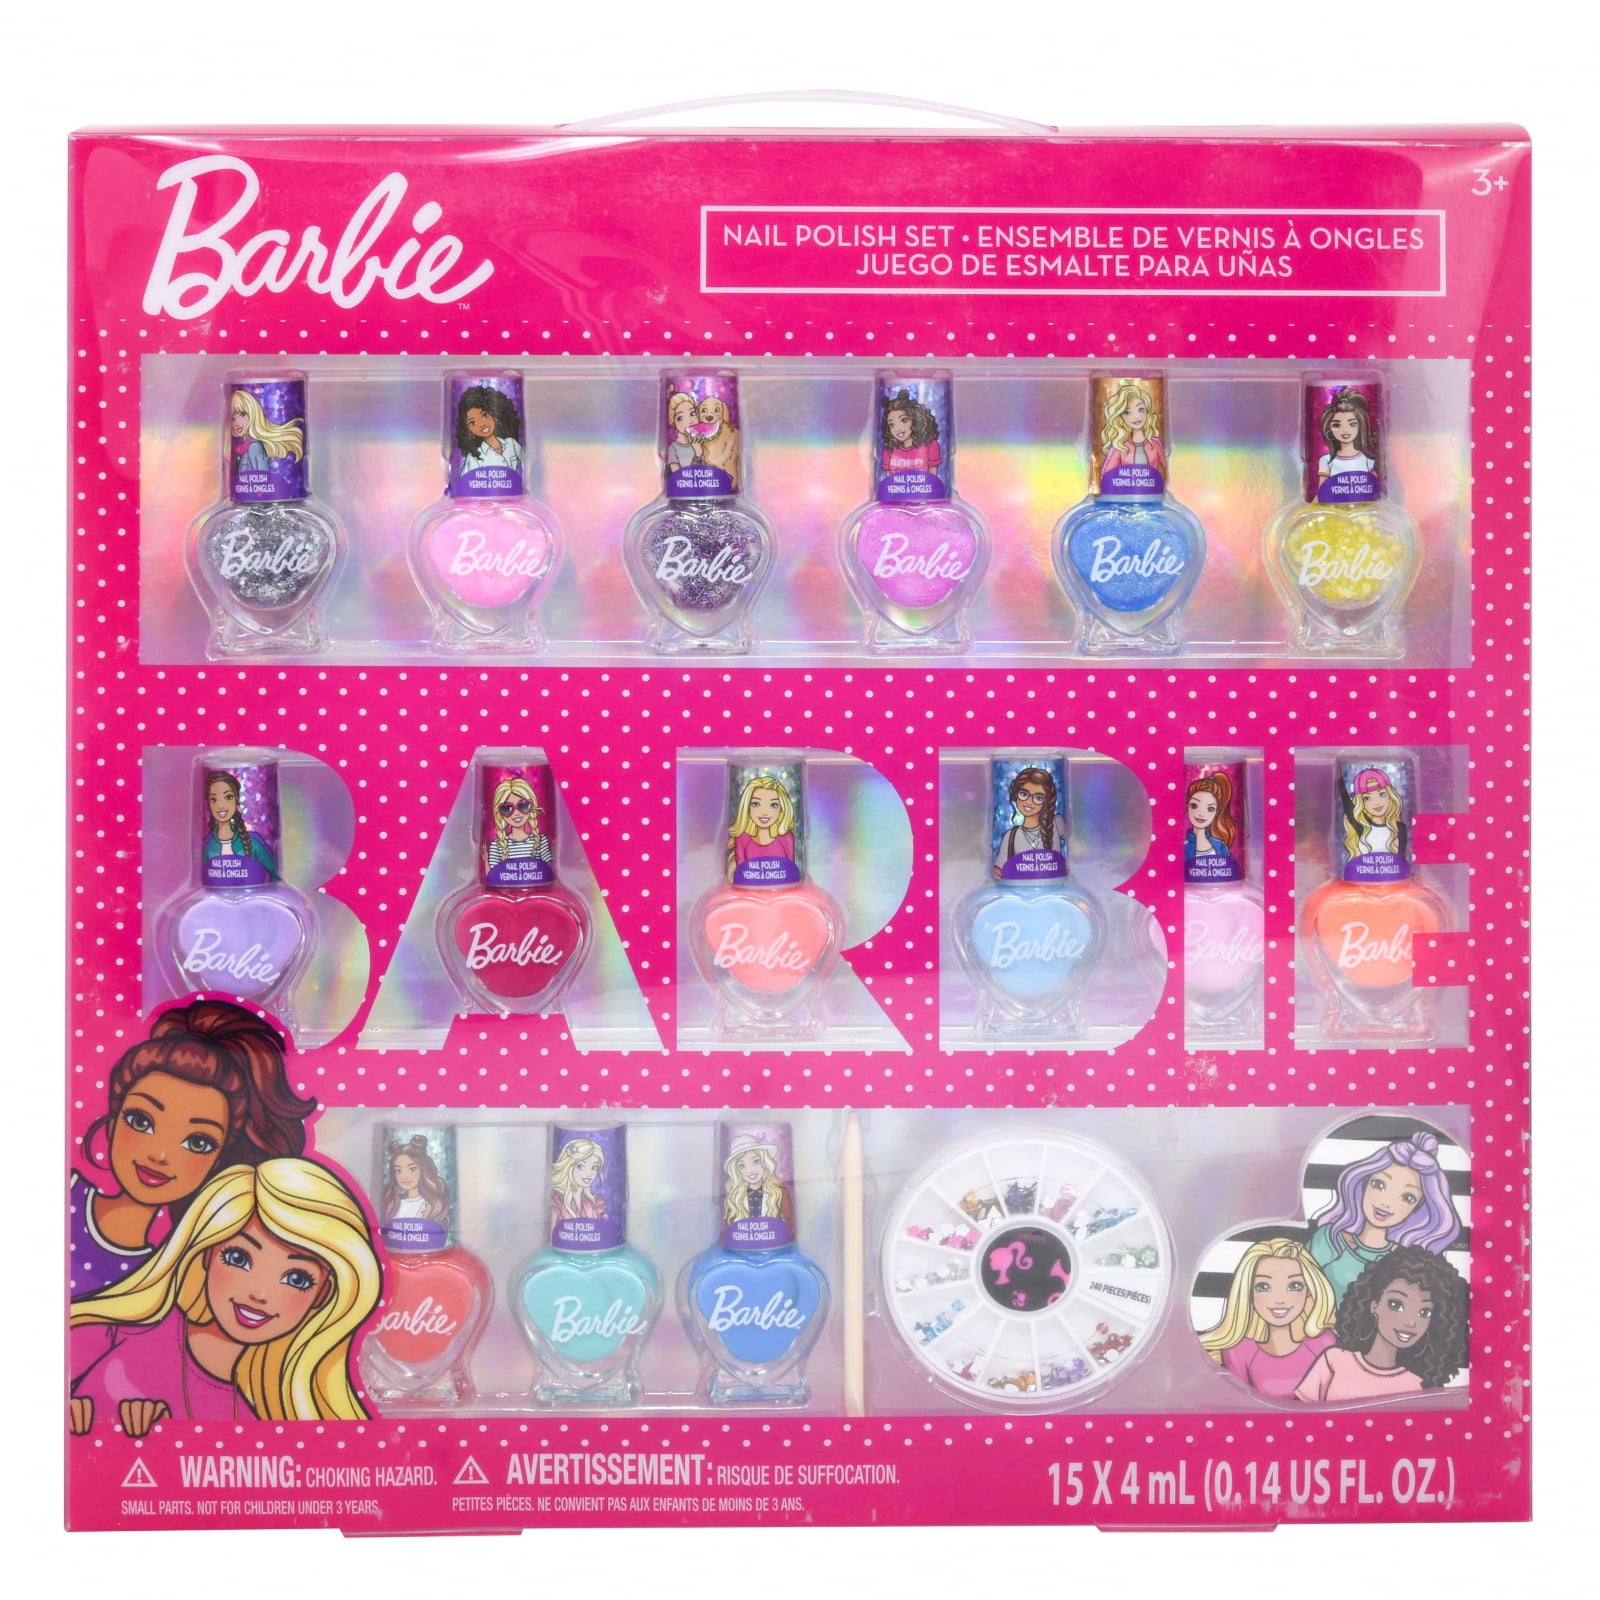 Barbie Fashion Plates All-In-One Studio Activity Kit [REVIEW]